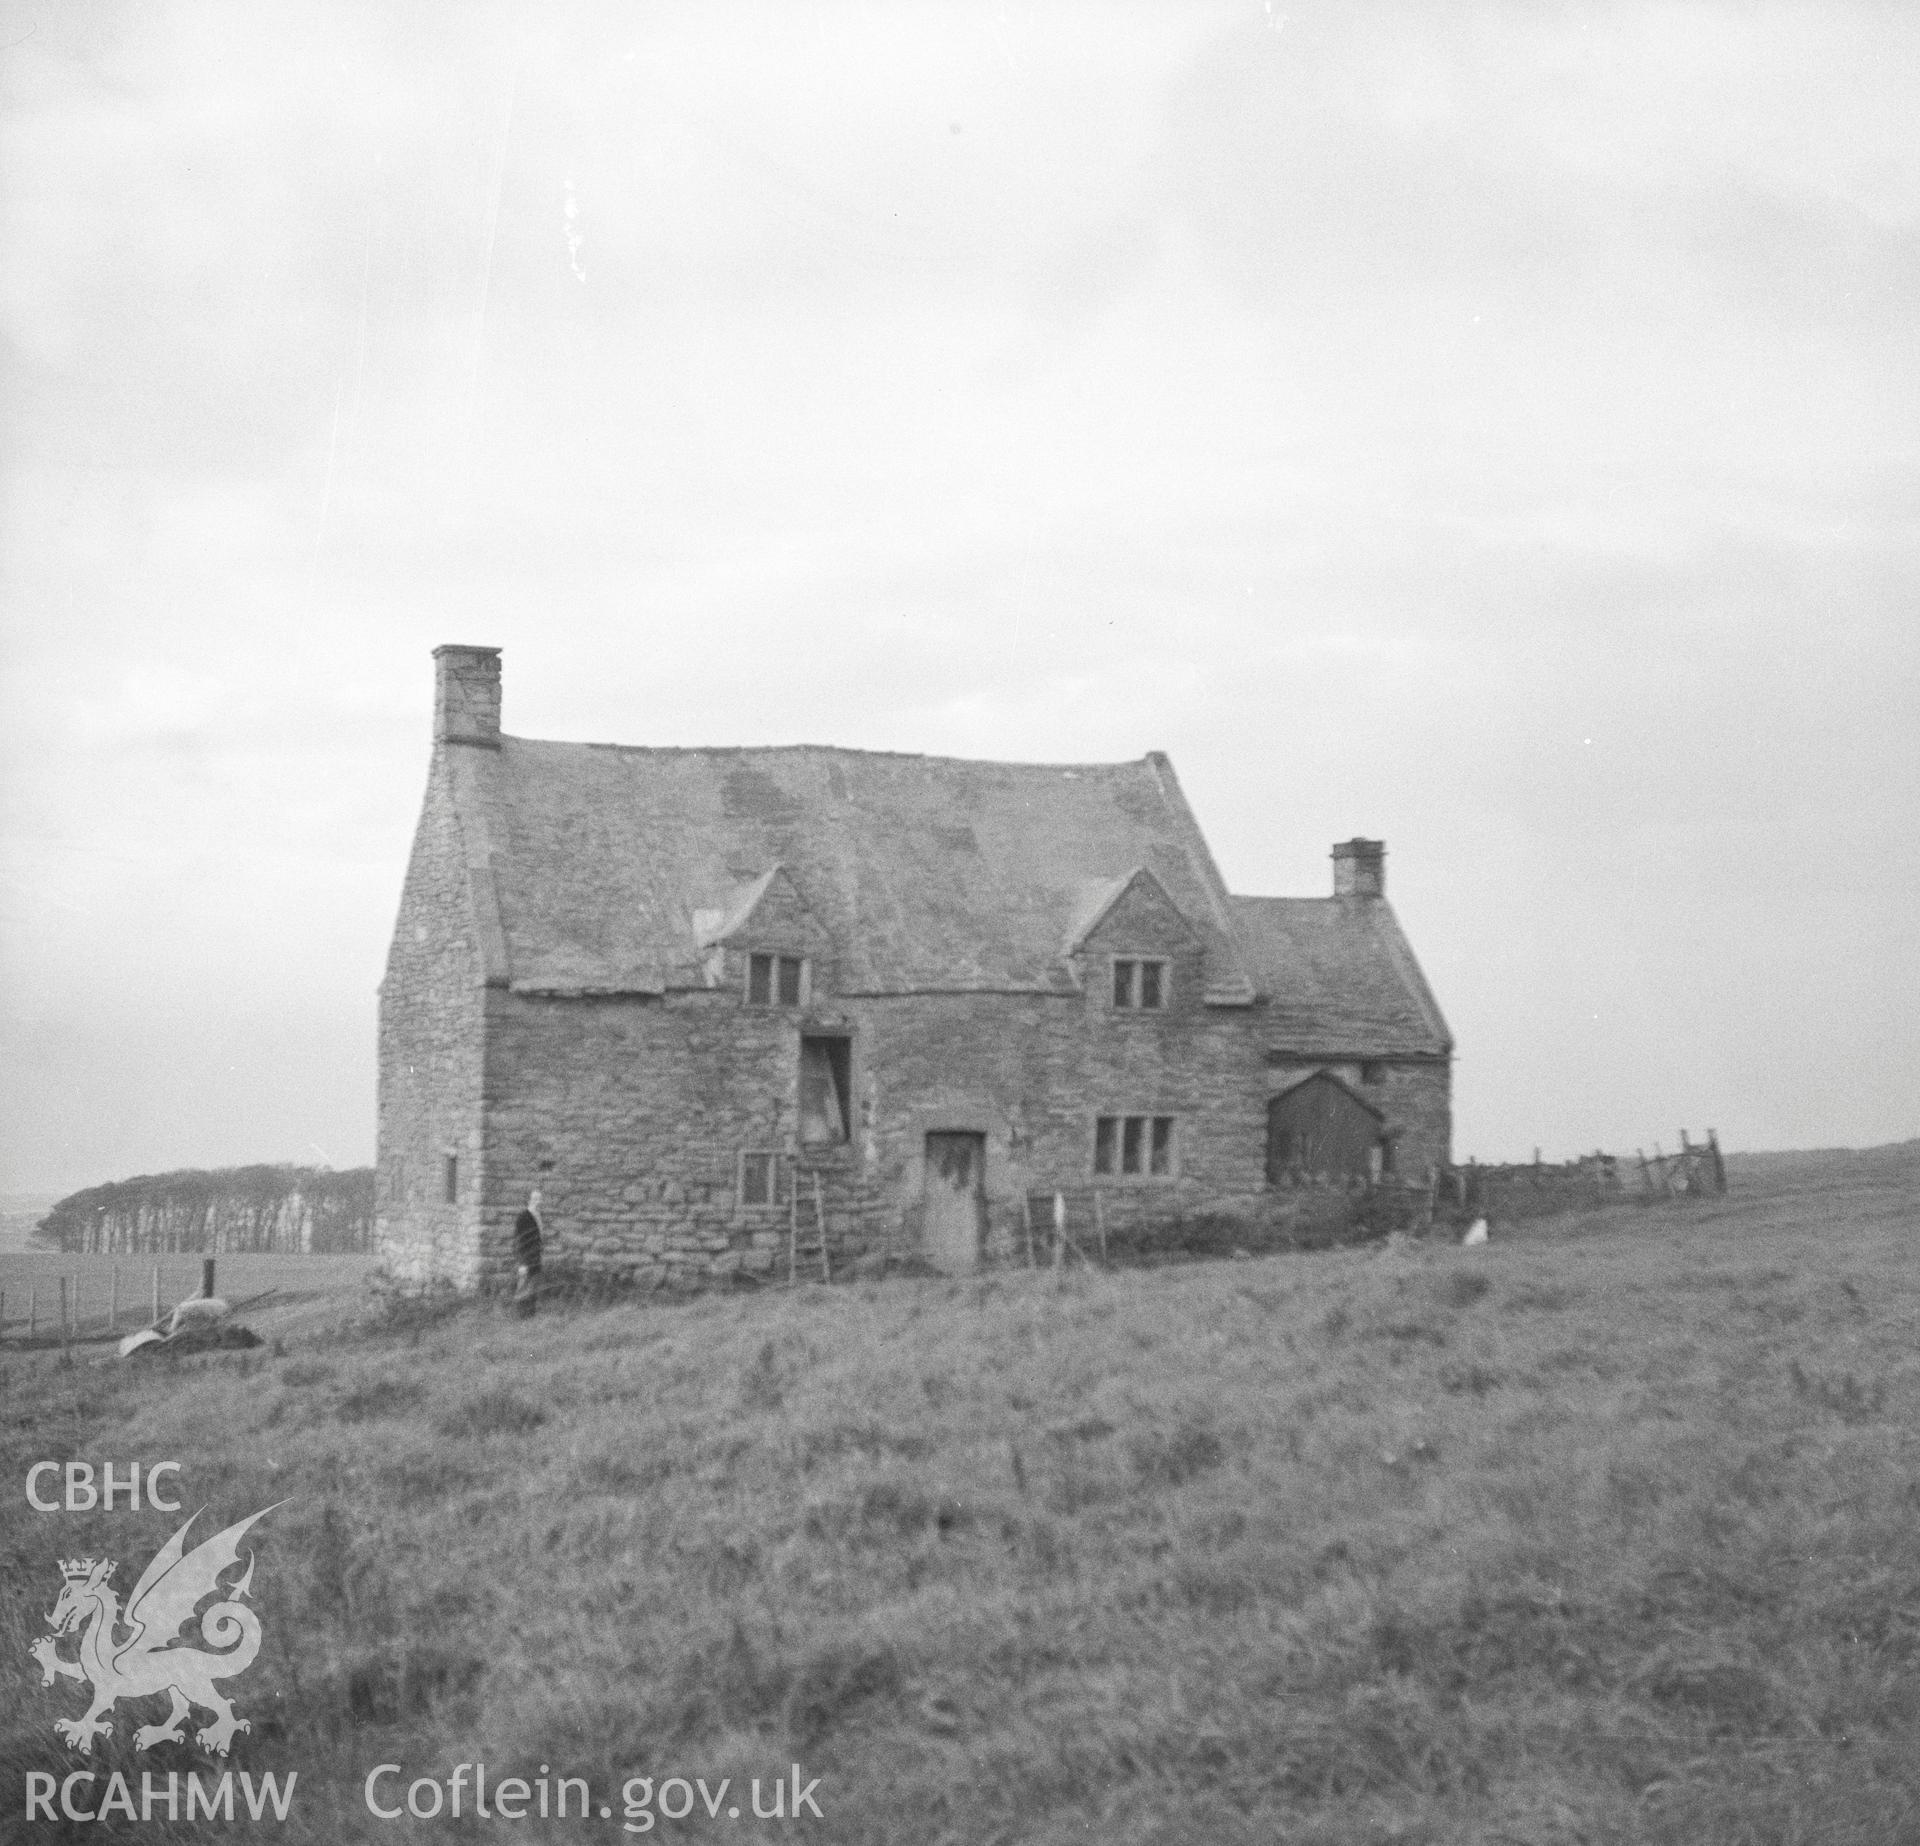 Digital cope of a black and white nitrate negative, exterior view of 'Llysty' near Llanasa in 1960.